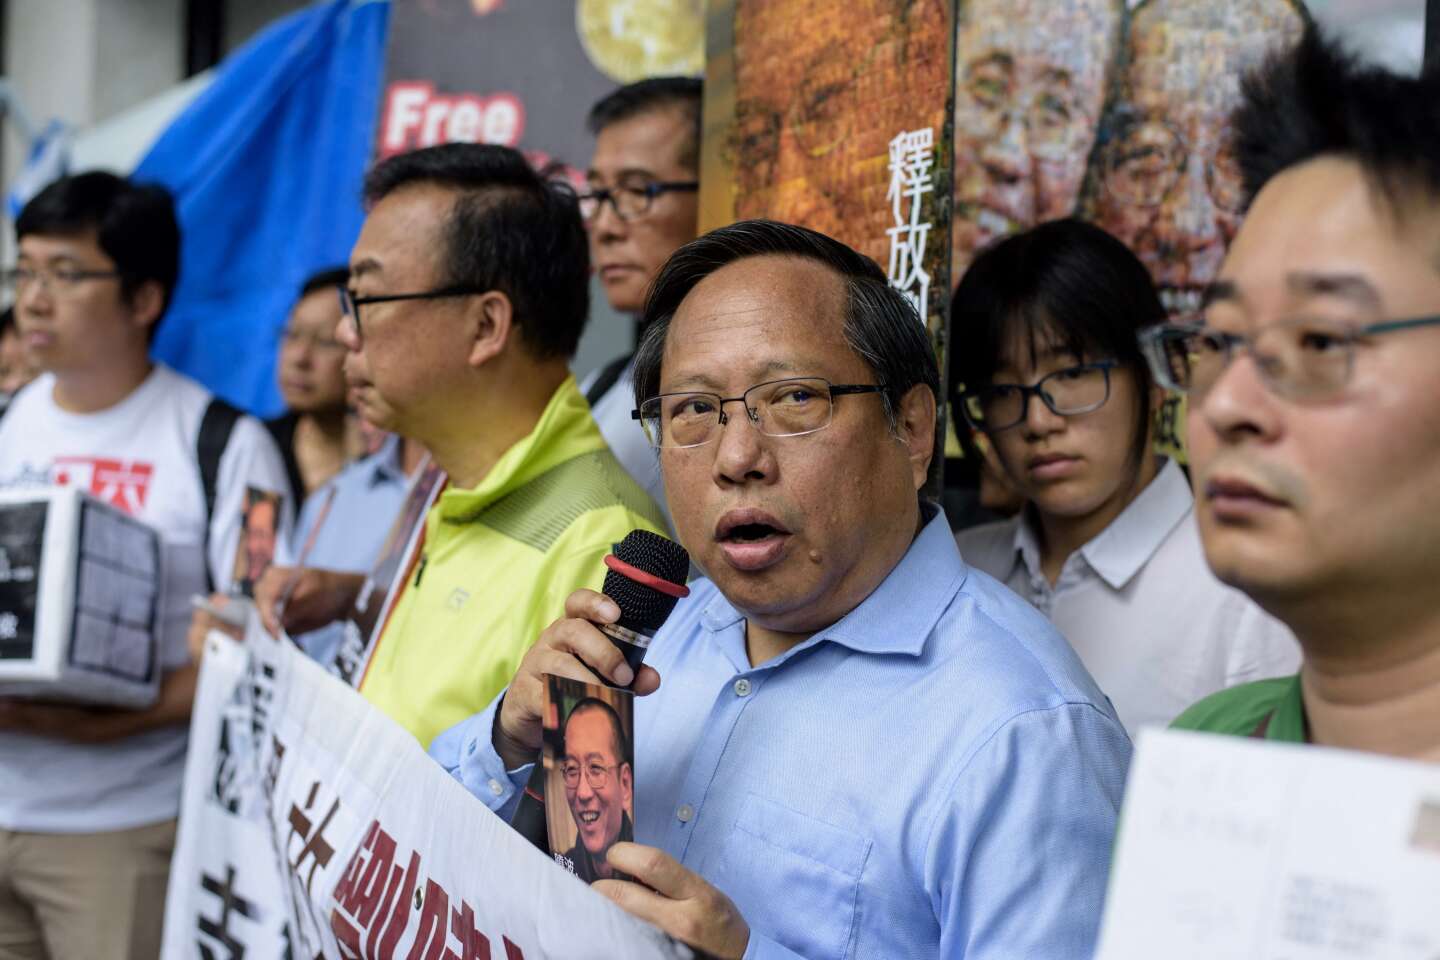 In Hong Kong, a prominent rights defender was arrested